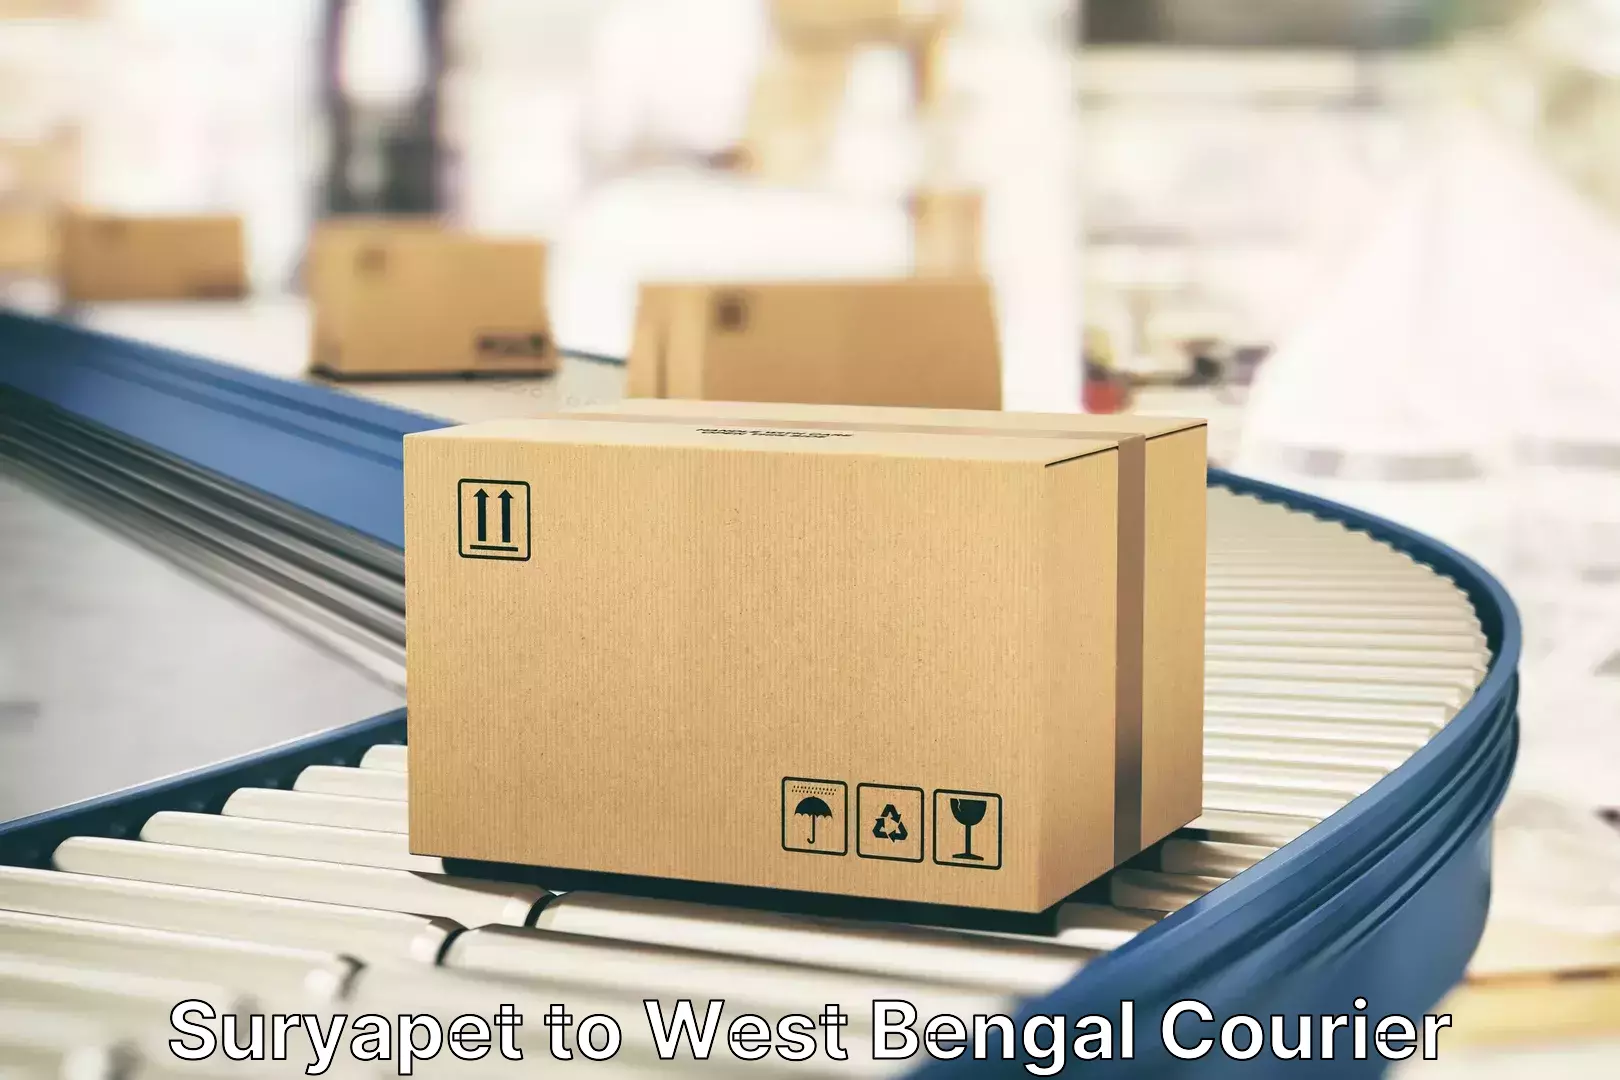 Baggage transport technology Suryapet to West Bengal